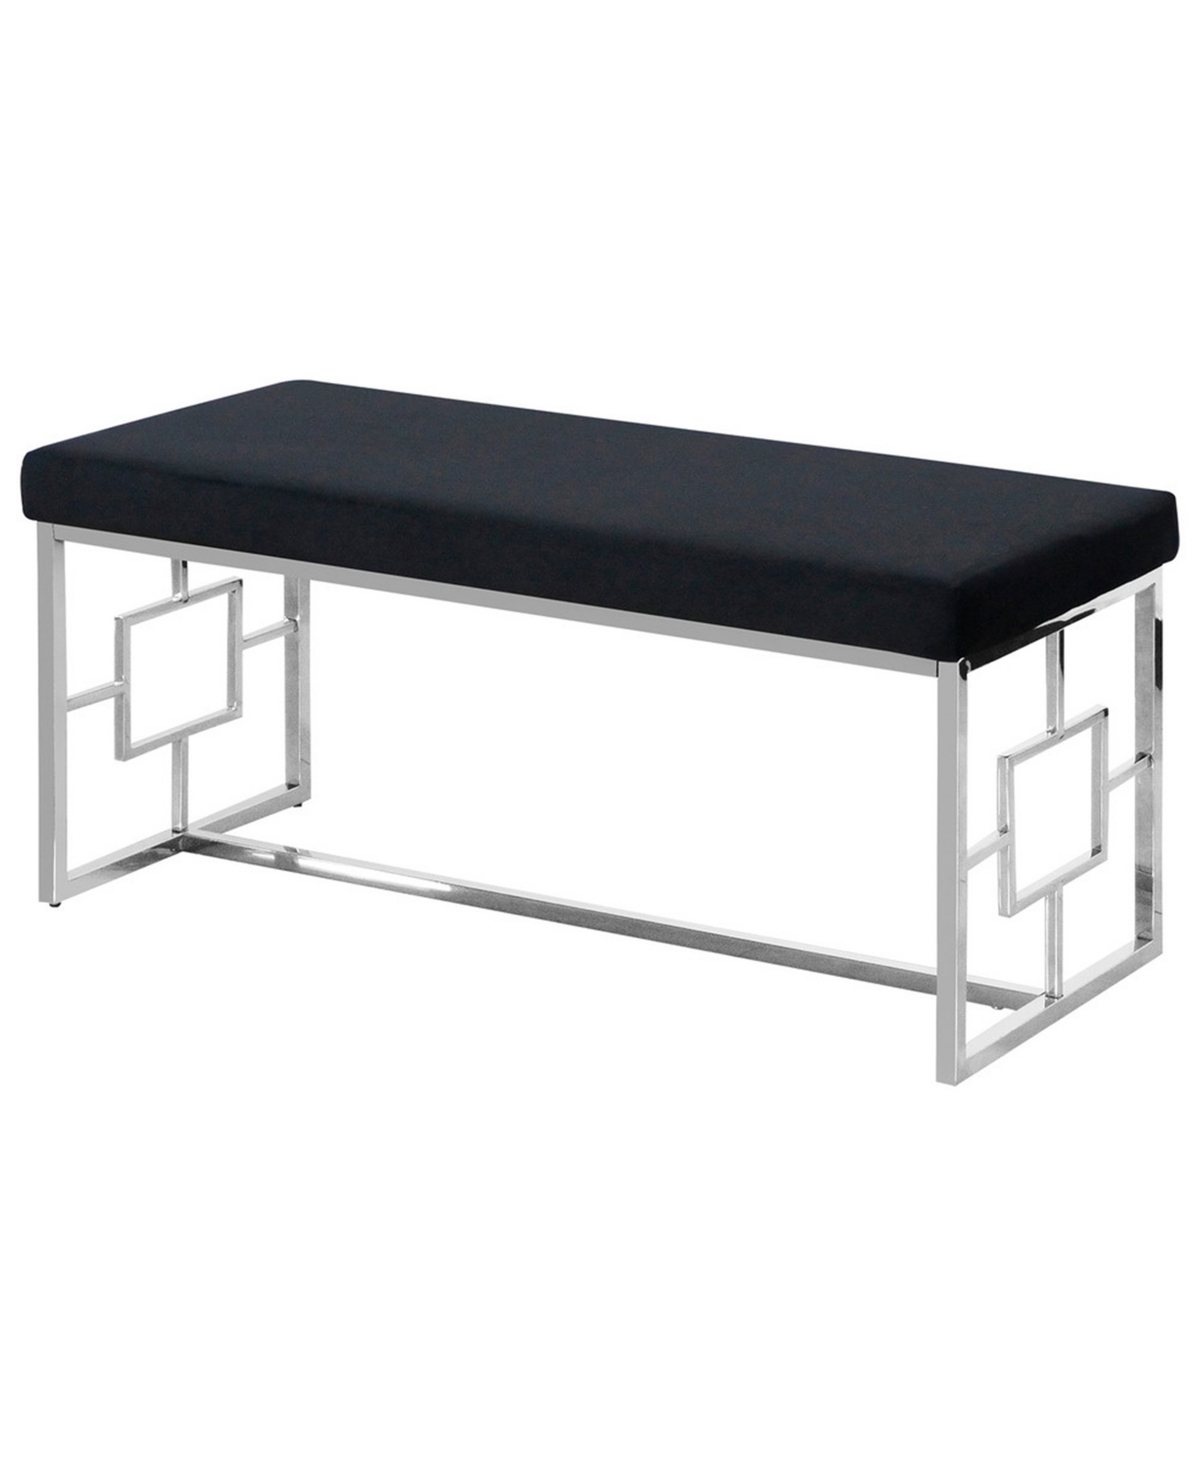 Louie Stainless Steel Bench